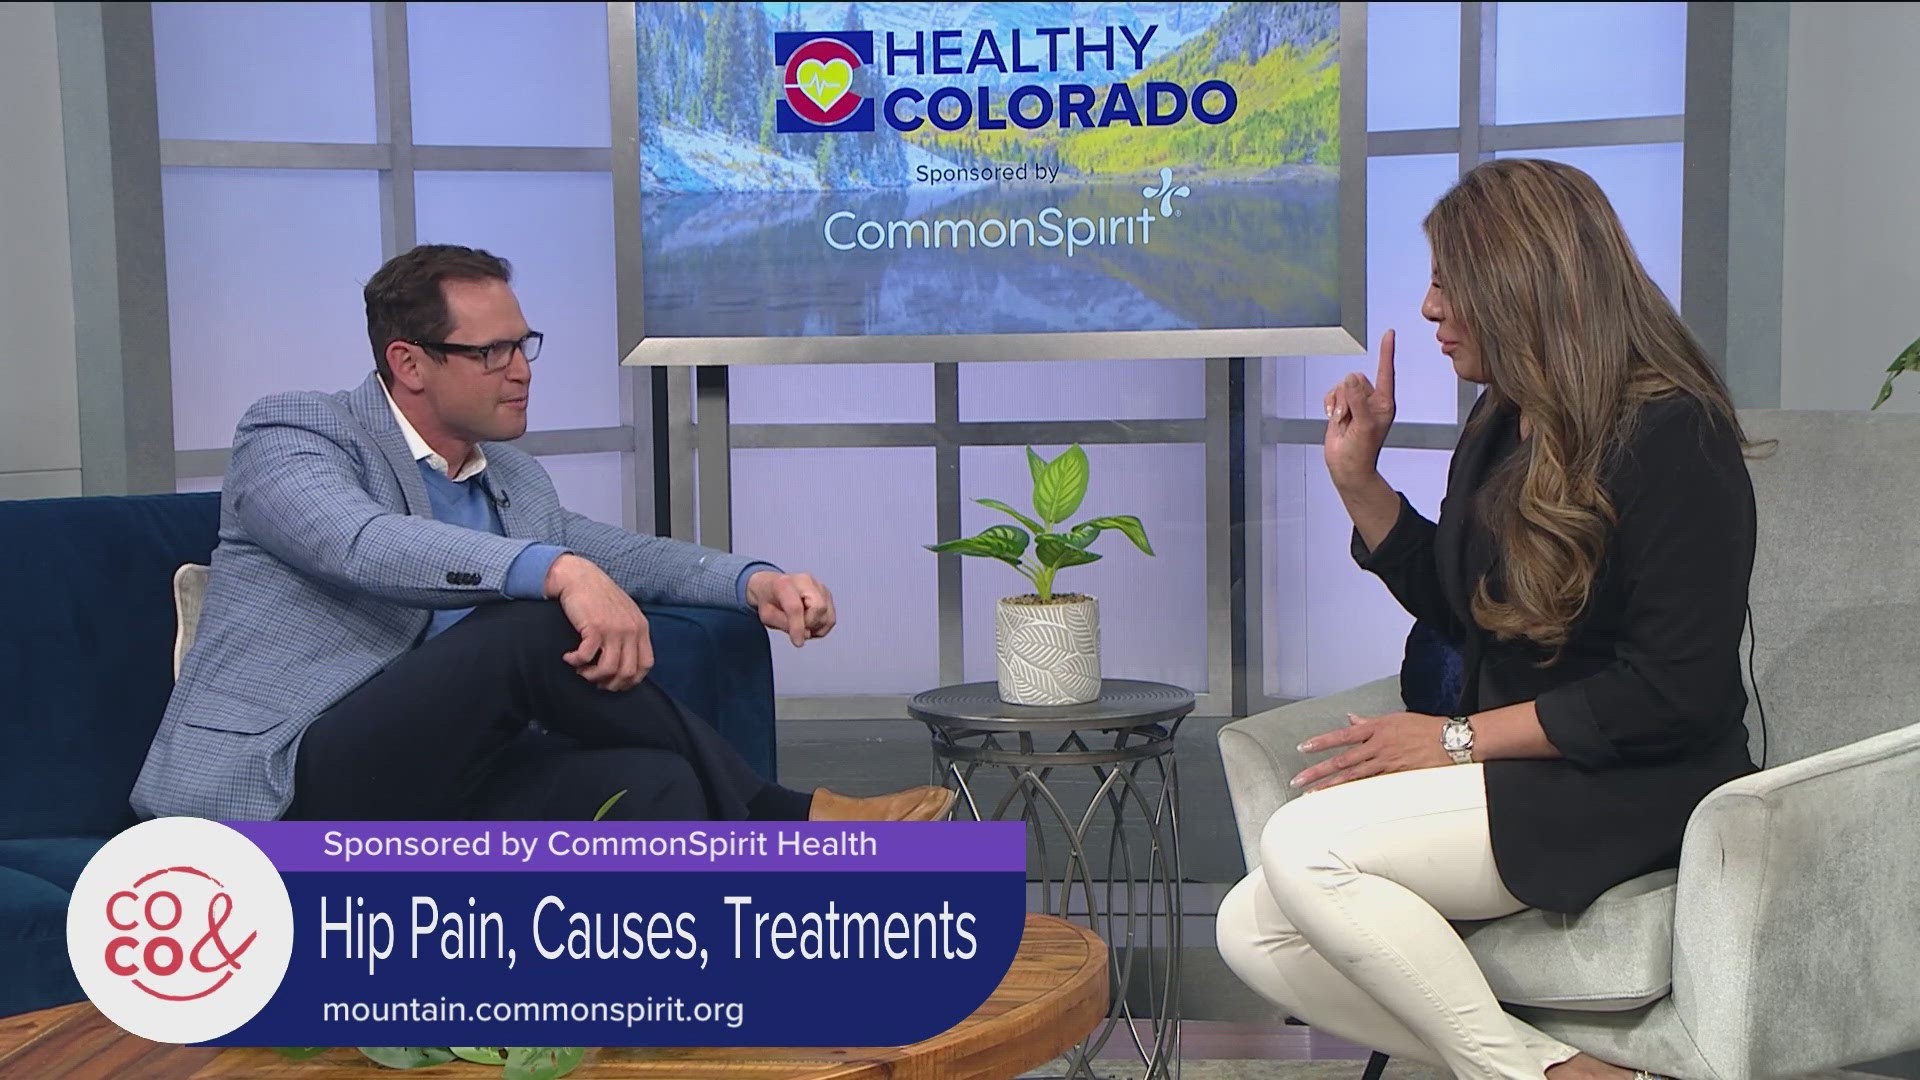 CommonSpirit Health wants us to understand why it's all in the hips. Arthritis is likely the culprit. Visit mountain.commonspirit.org for more info. *PAID CONTENT*